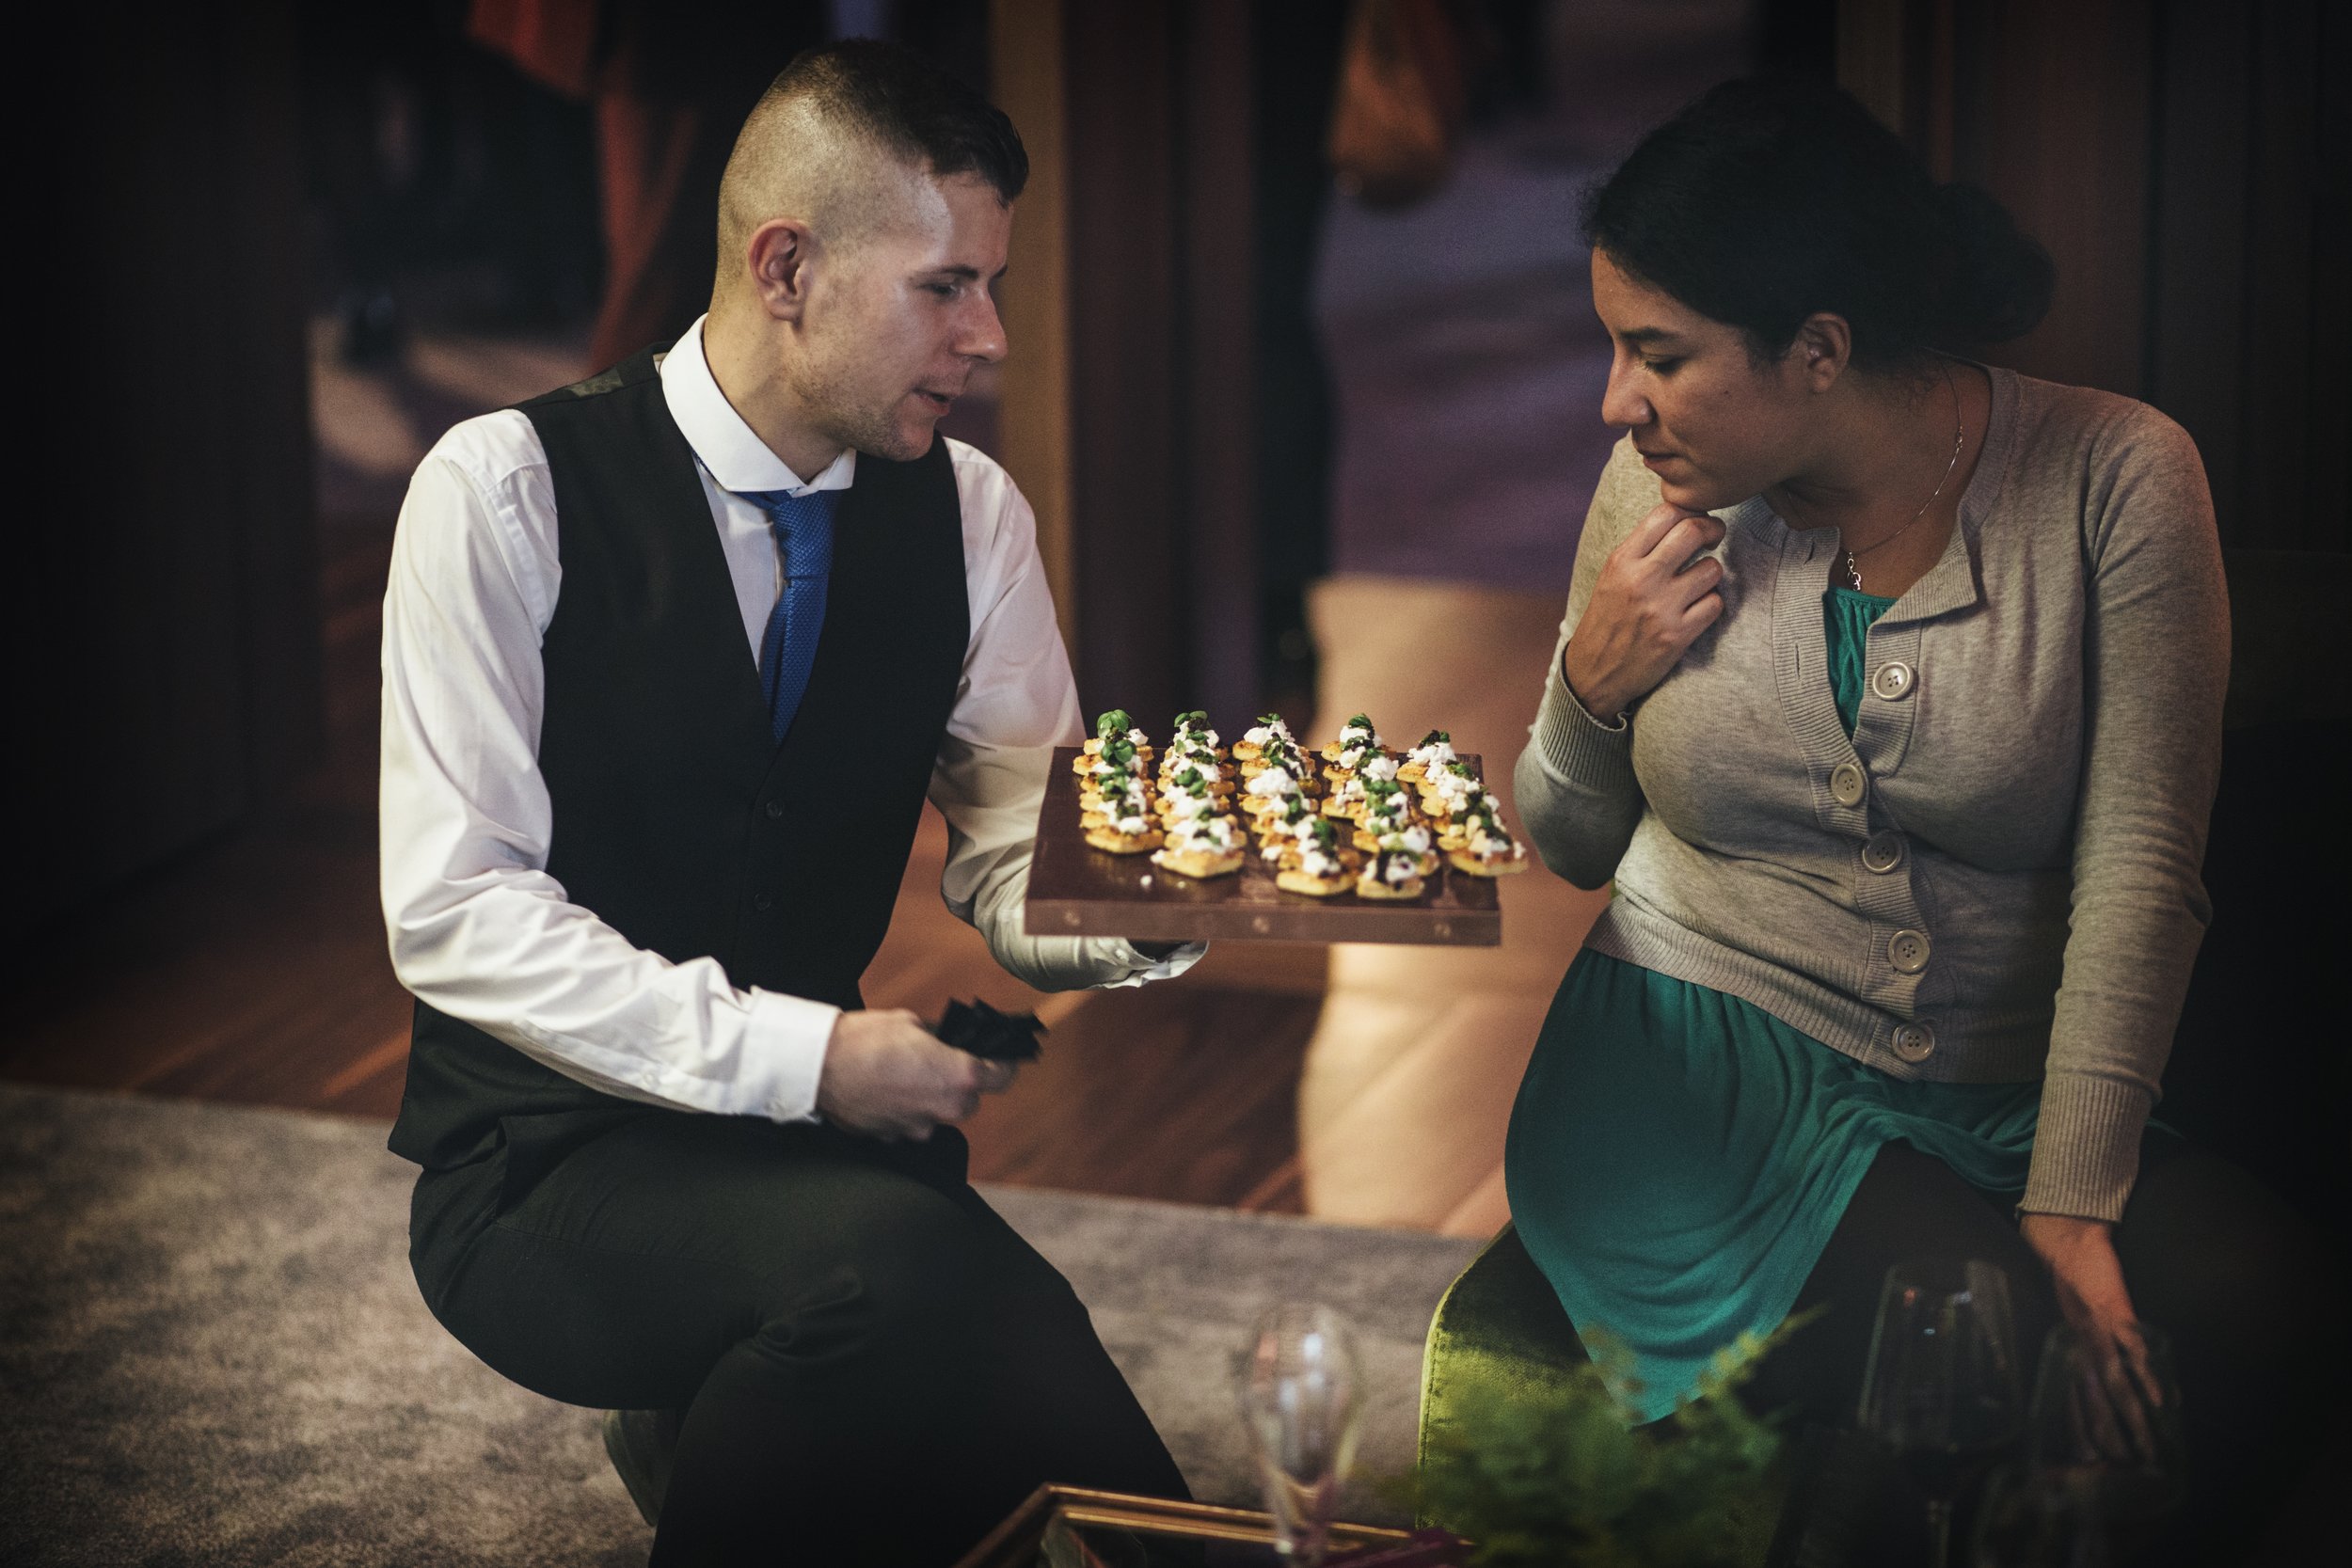 Guests discovering our canapes